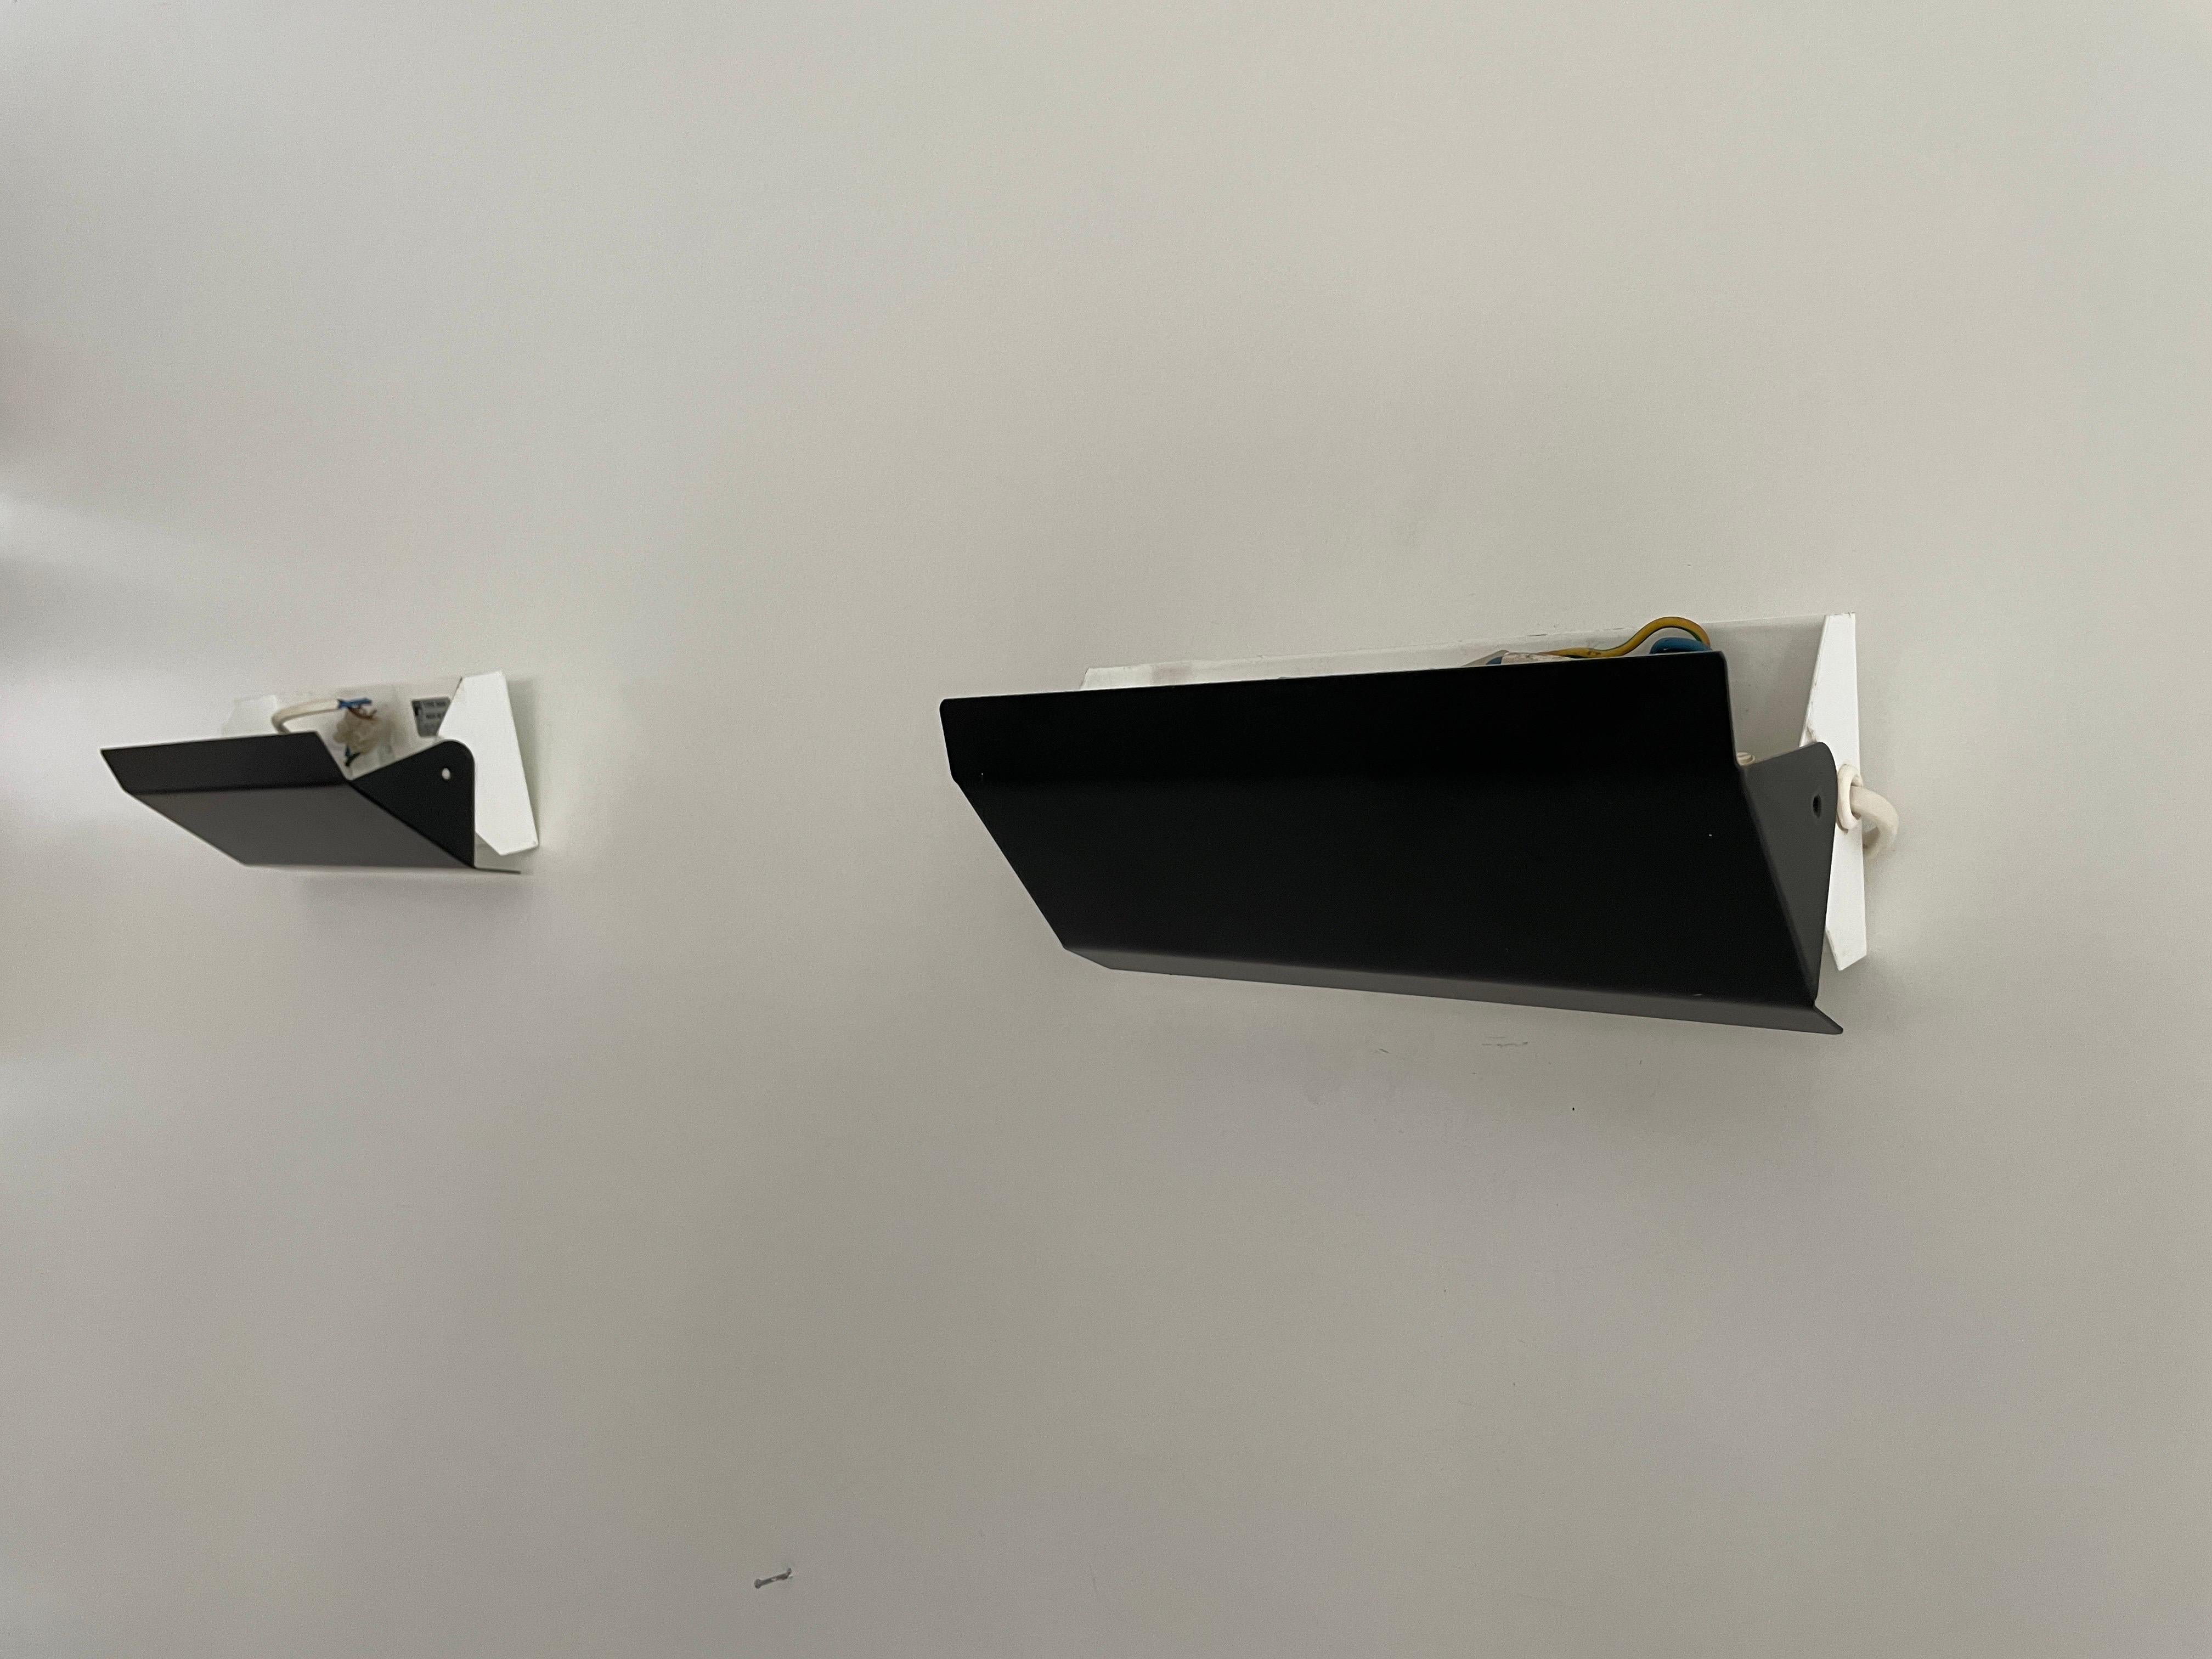 Black and White Metal Pair of Sconces by Horn Leuchten, 1950s, Germany For Sale 1